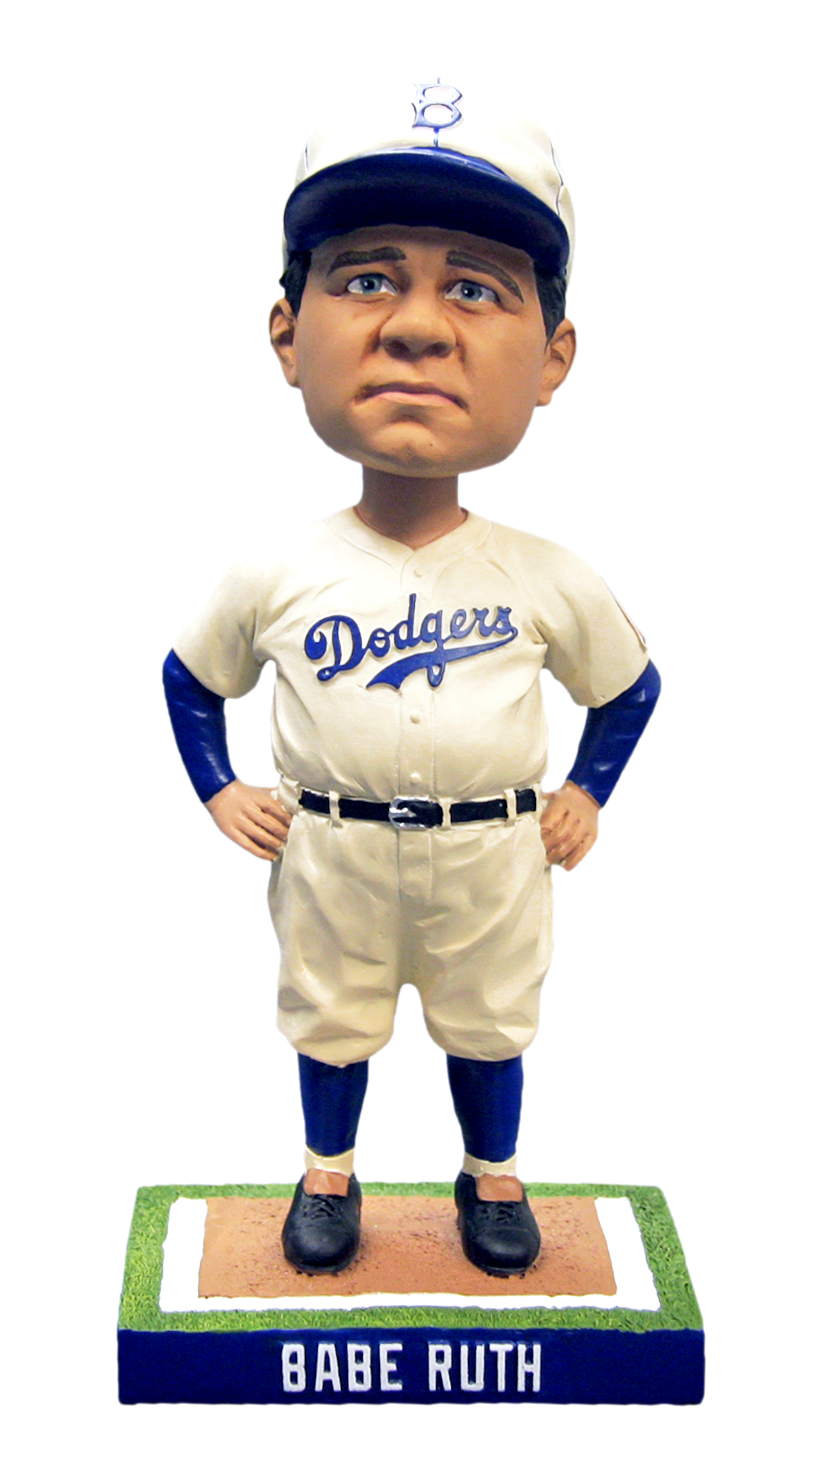 Babe Ruth bobblehead ( dodgers ) for Sale in Pico Rivera, CA - OfferUp